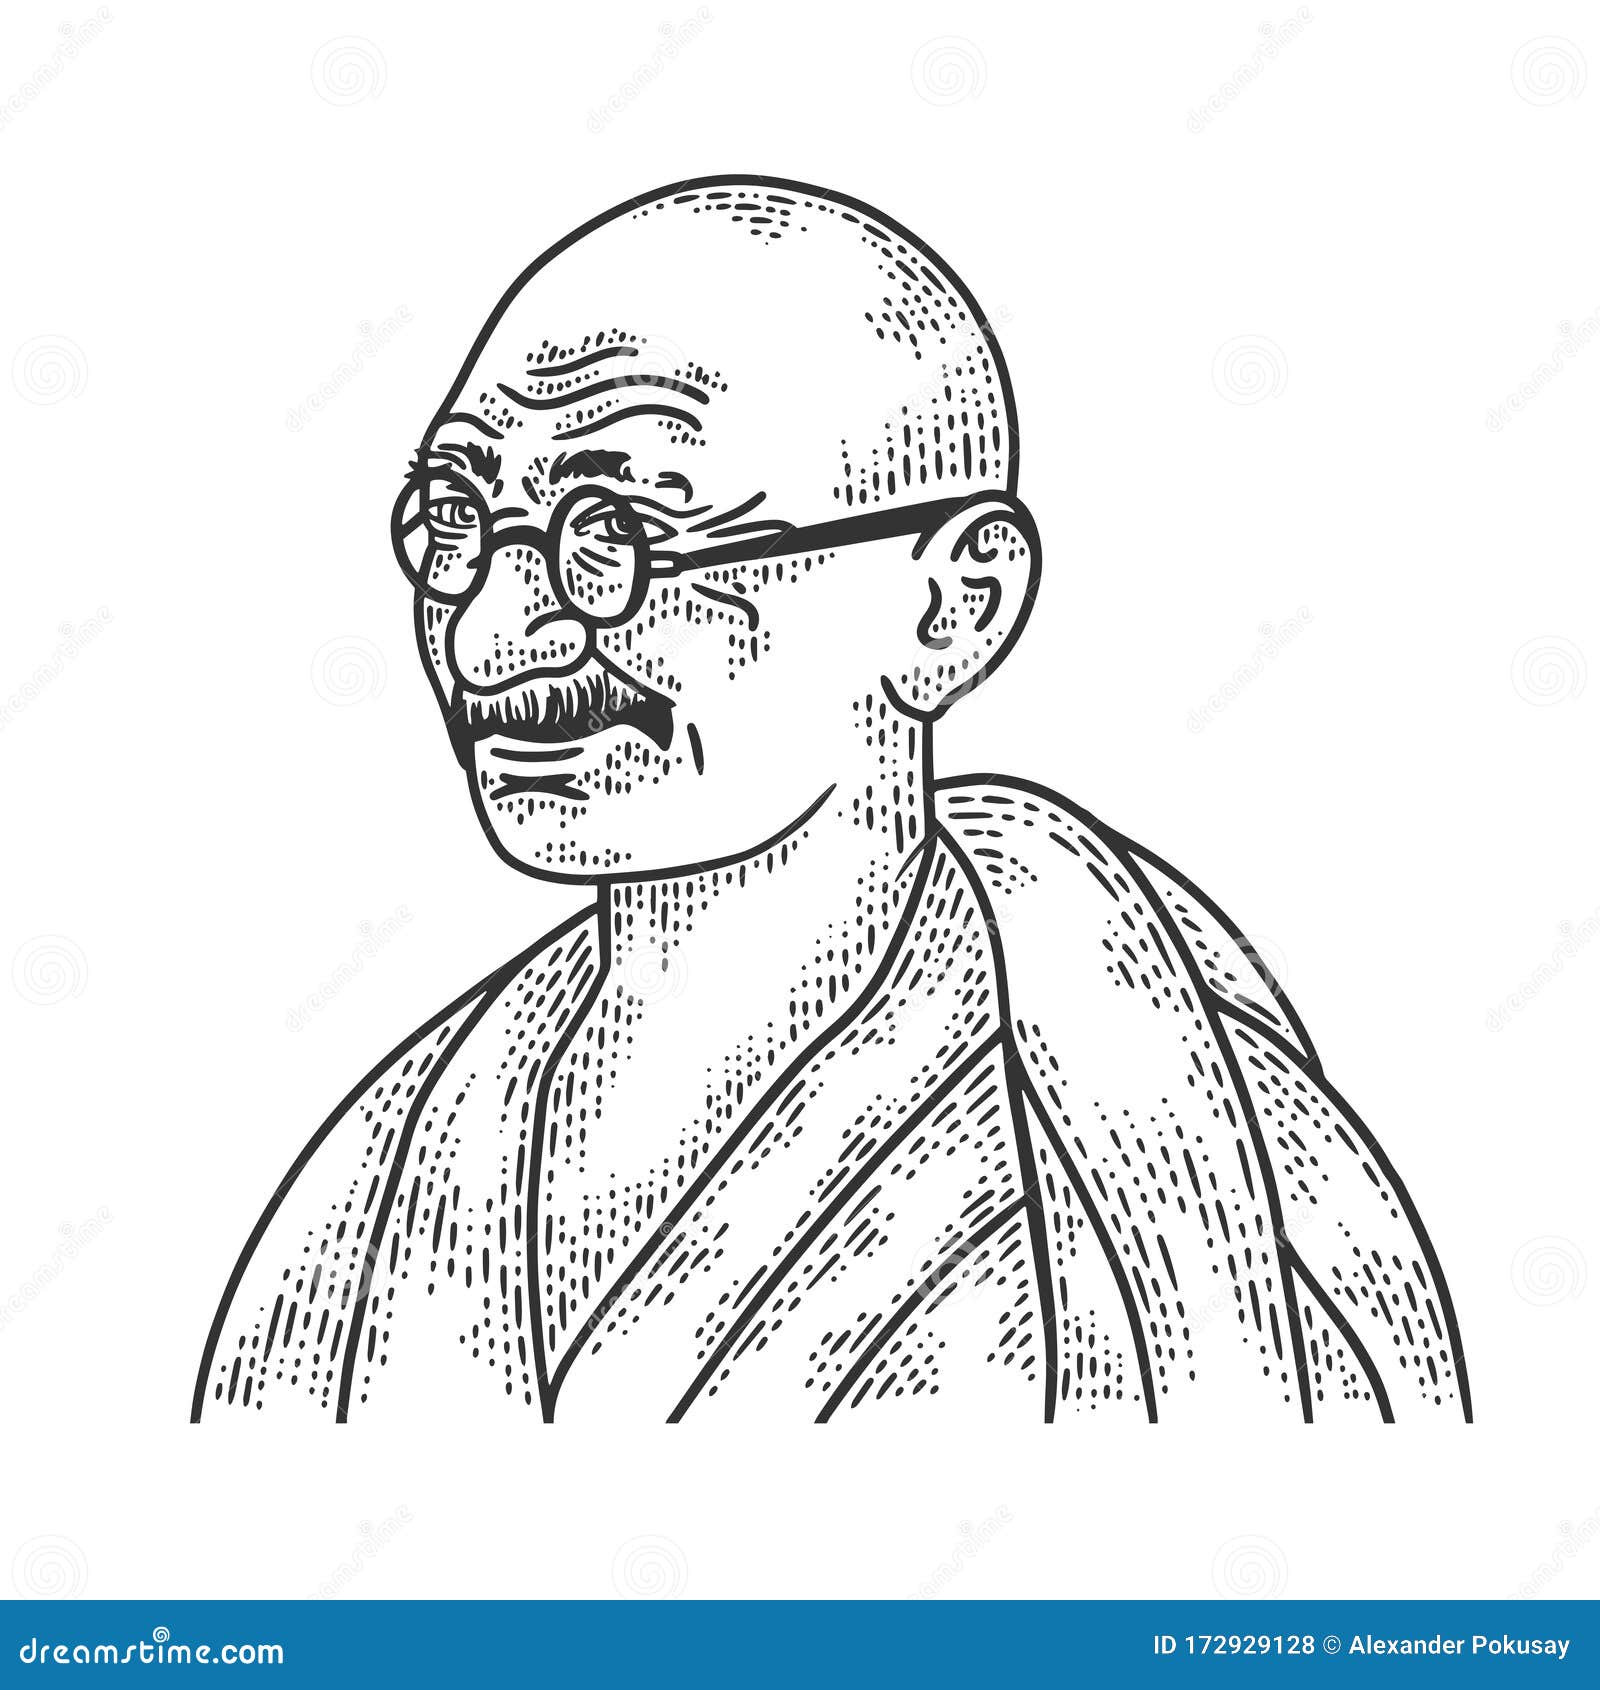 Aggregate more than 129 gandhi drawing easy for kids best